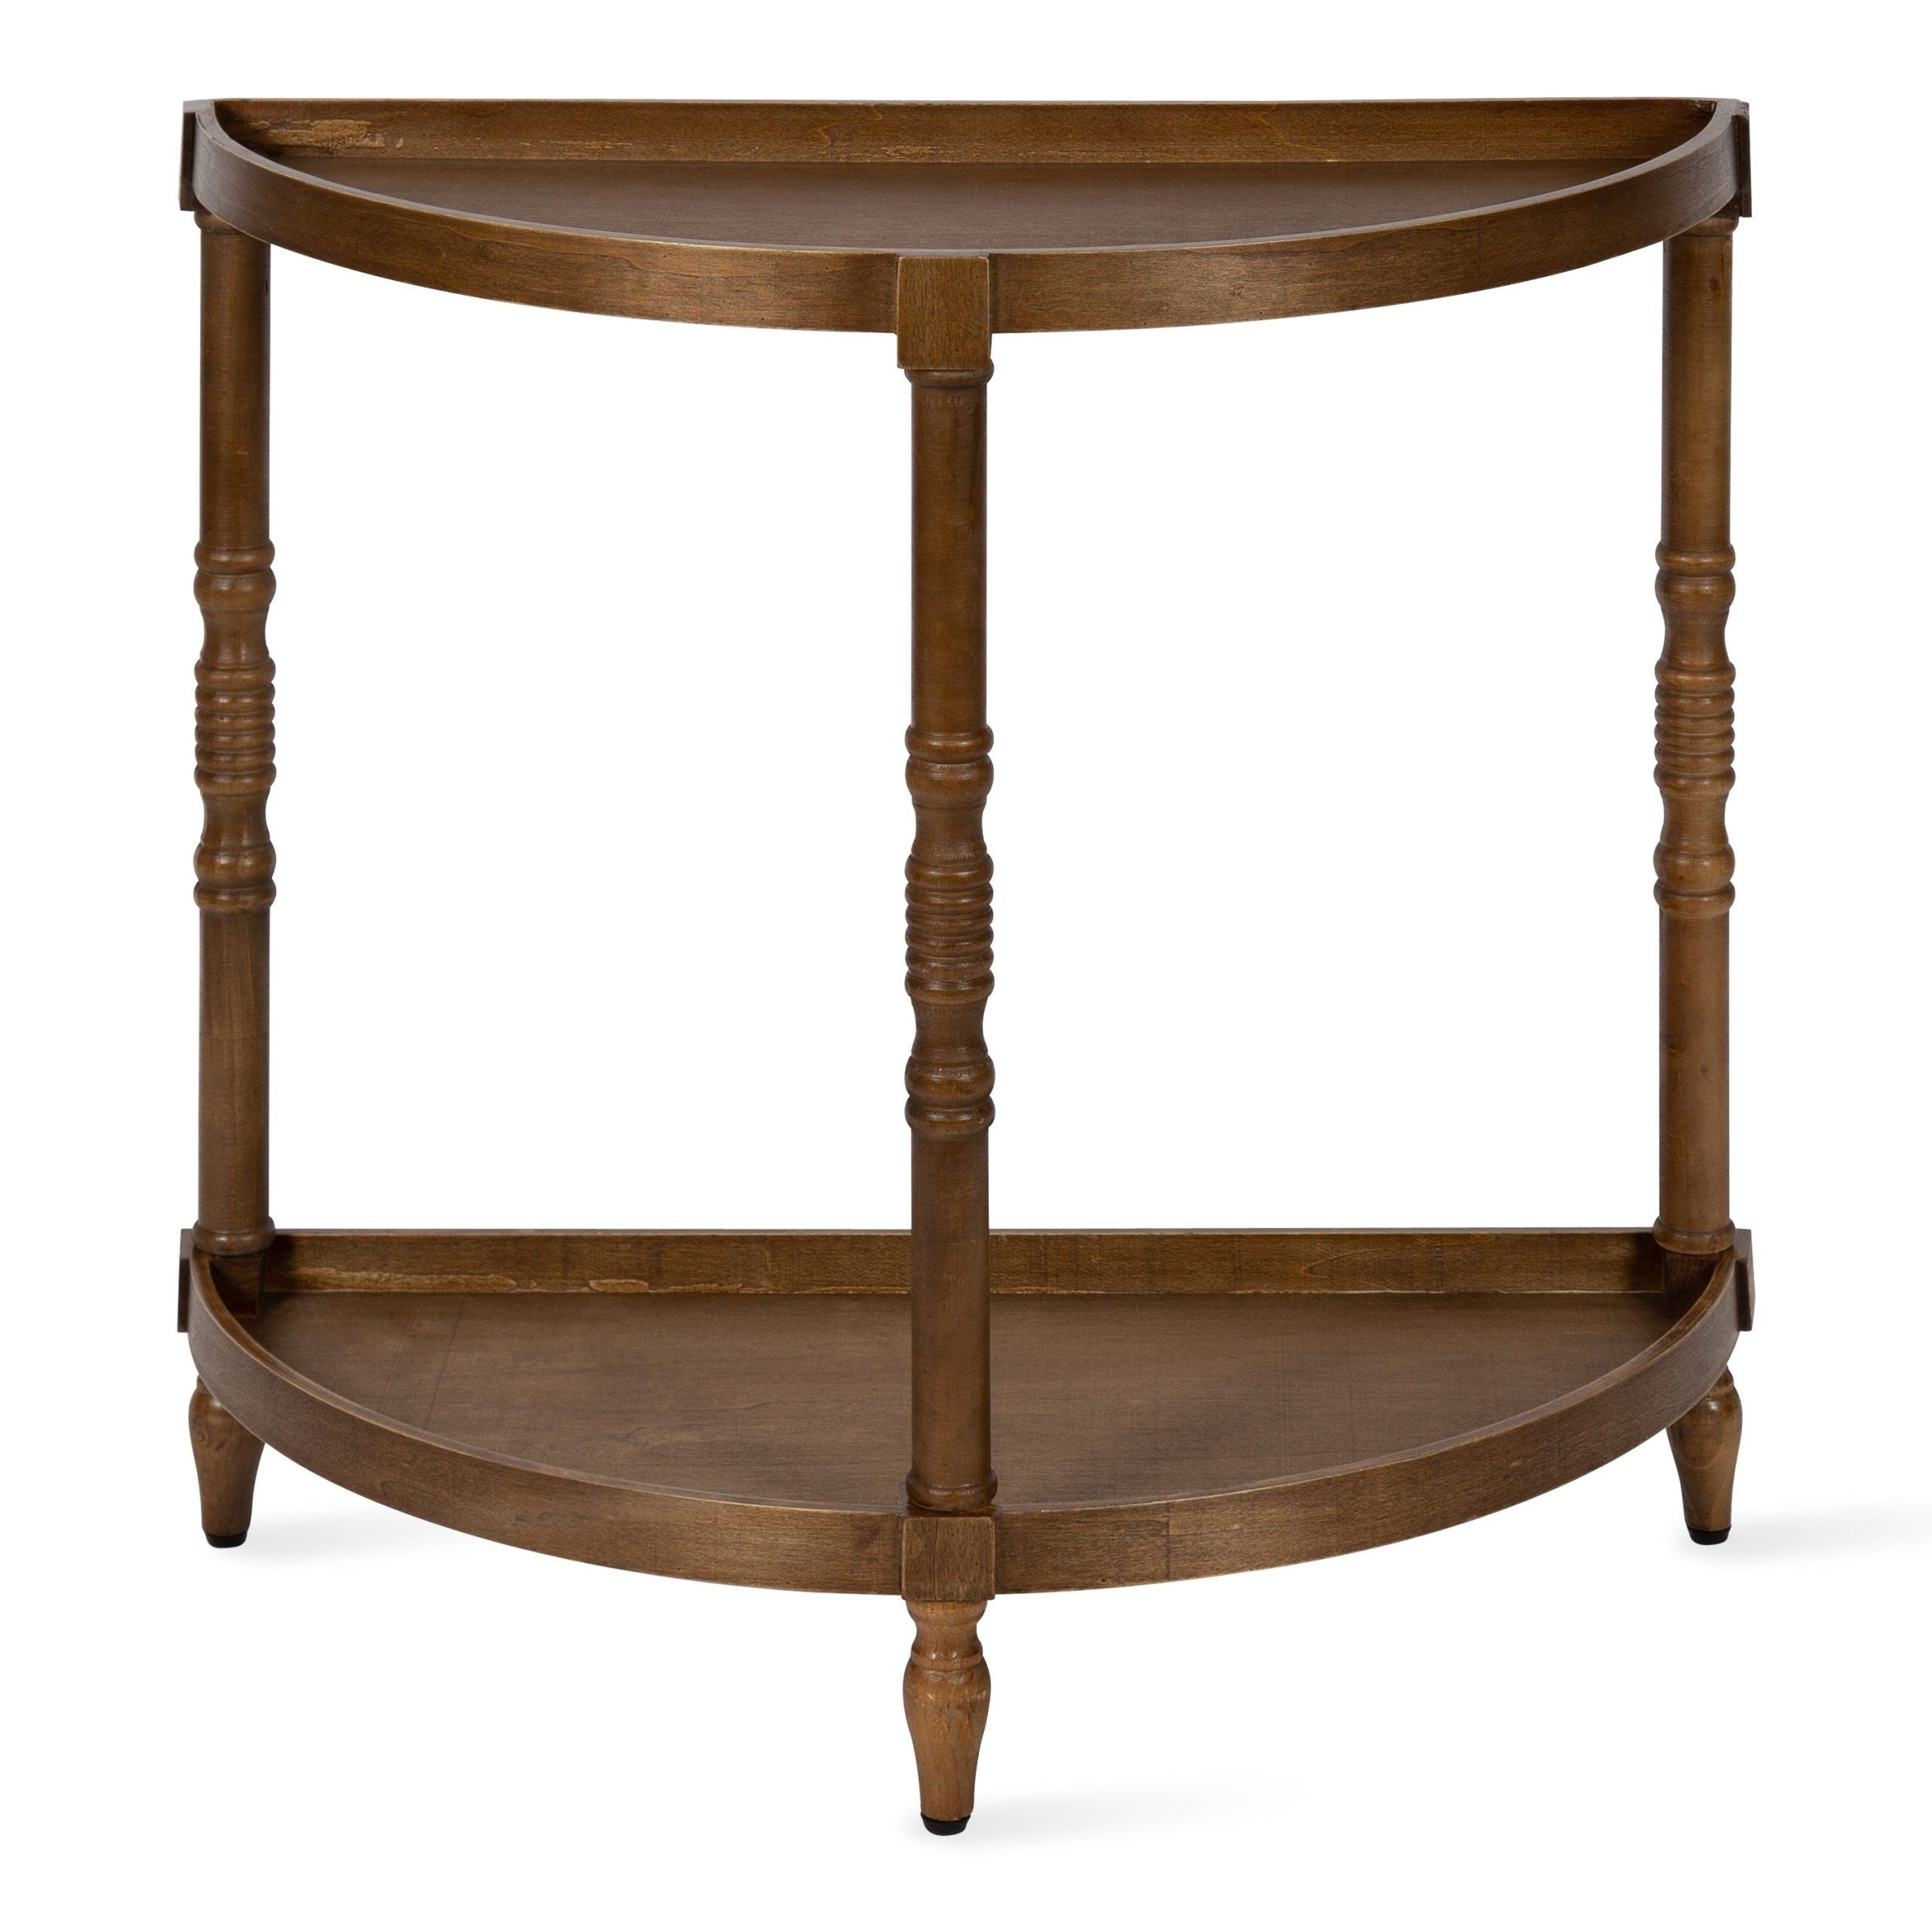 Kate And Laurel Bellport Farmhouse Demilune Console Table, 30 X 14 X 30 Throughout Kate And Laurel Bellport Farmhouse Drink Tables (View 13 of 20)